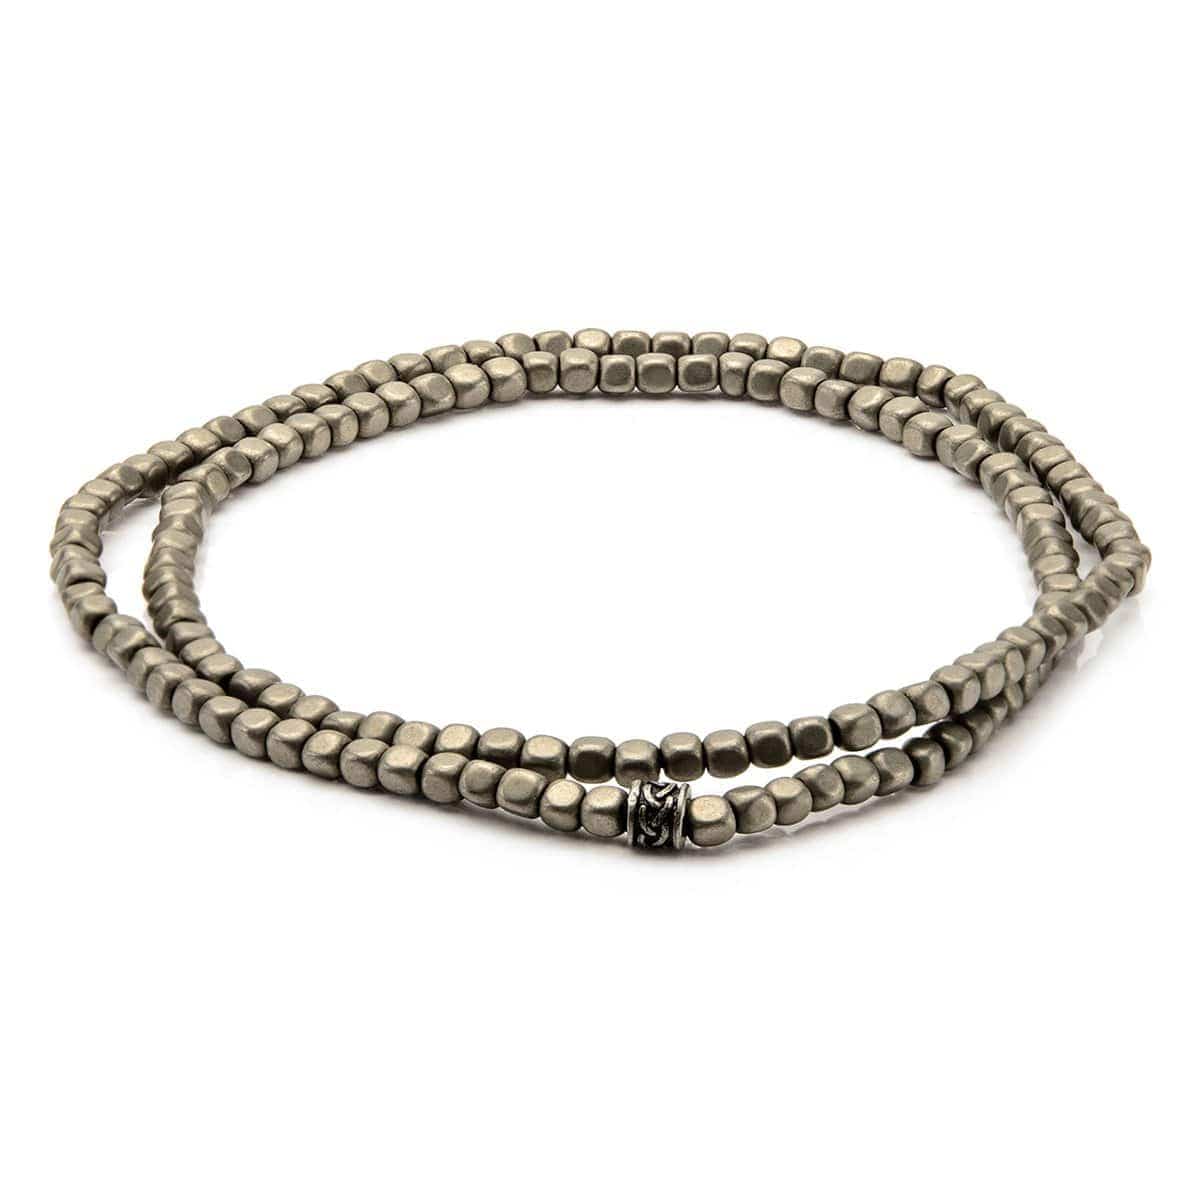 INOX JEWELRY Bracelets Antiqued Silver Tone Stainless Steel with Gray Hematite Stone Bead Intertwined Stackable Bracelet BR686123